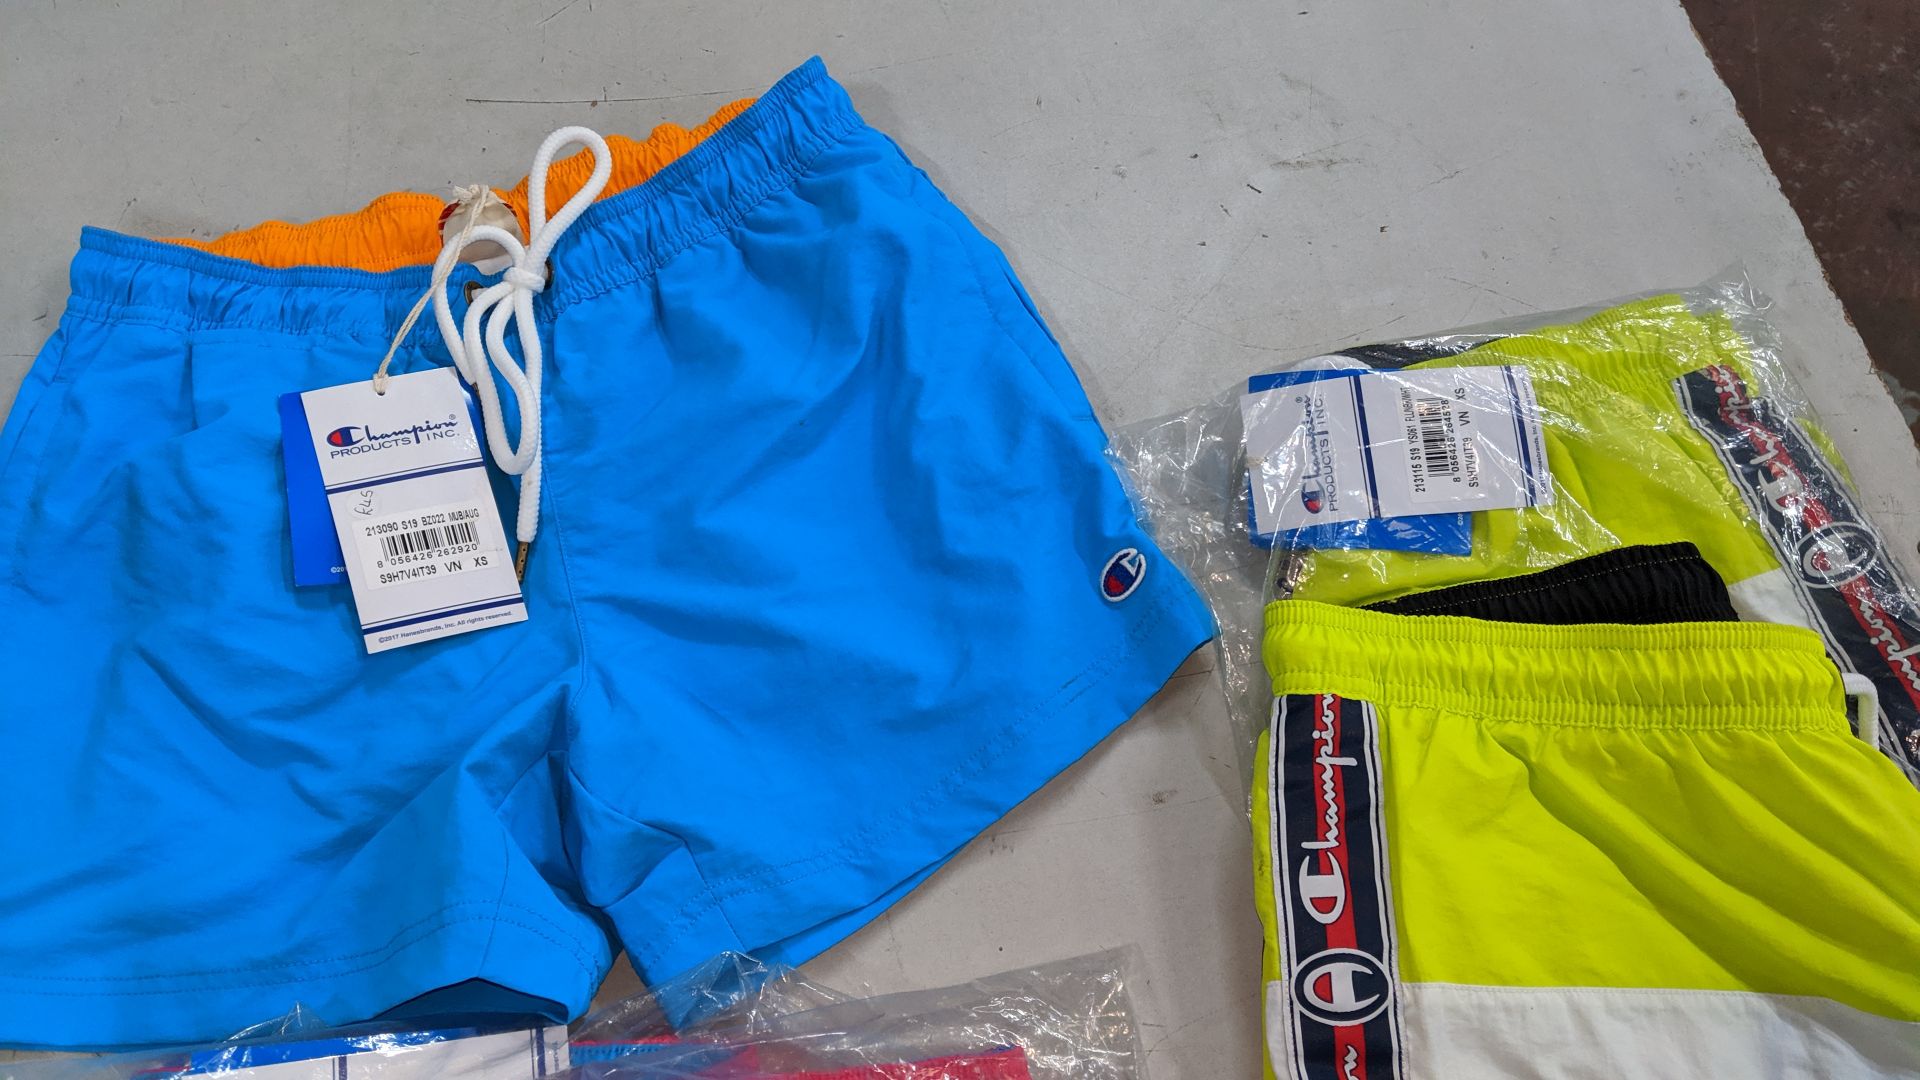 7 off Champion swim shorts. This is one of a number of lots being sold on behalf of the - Image 8 of 8